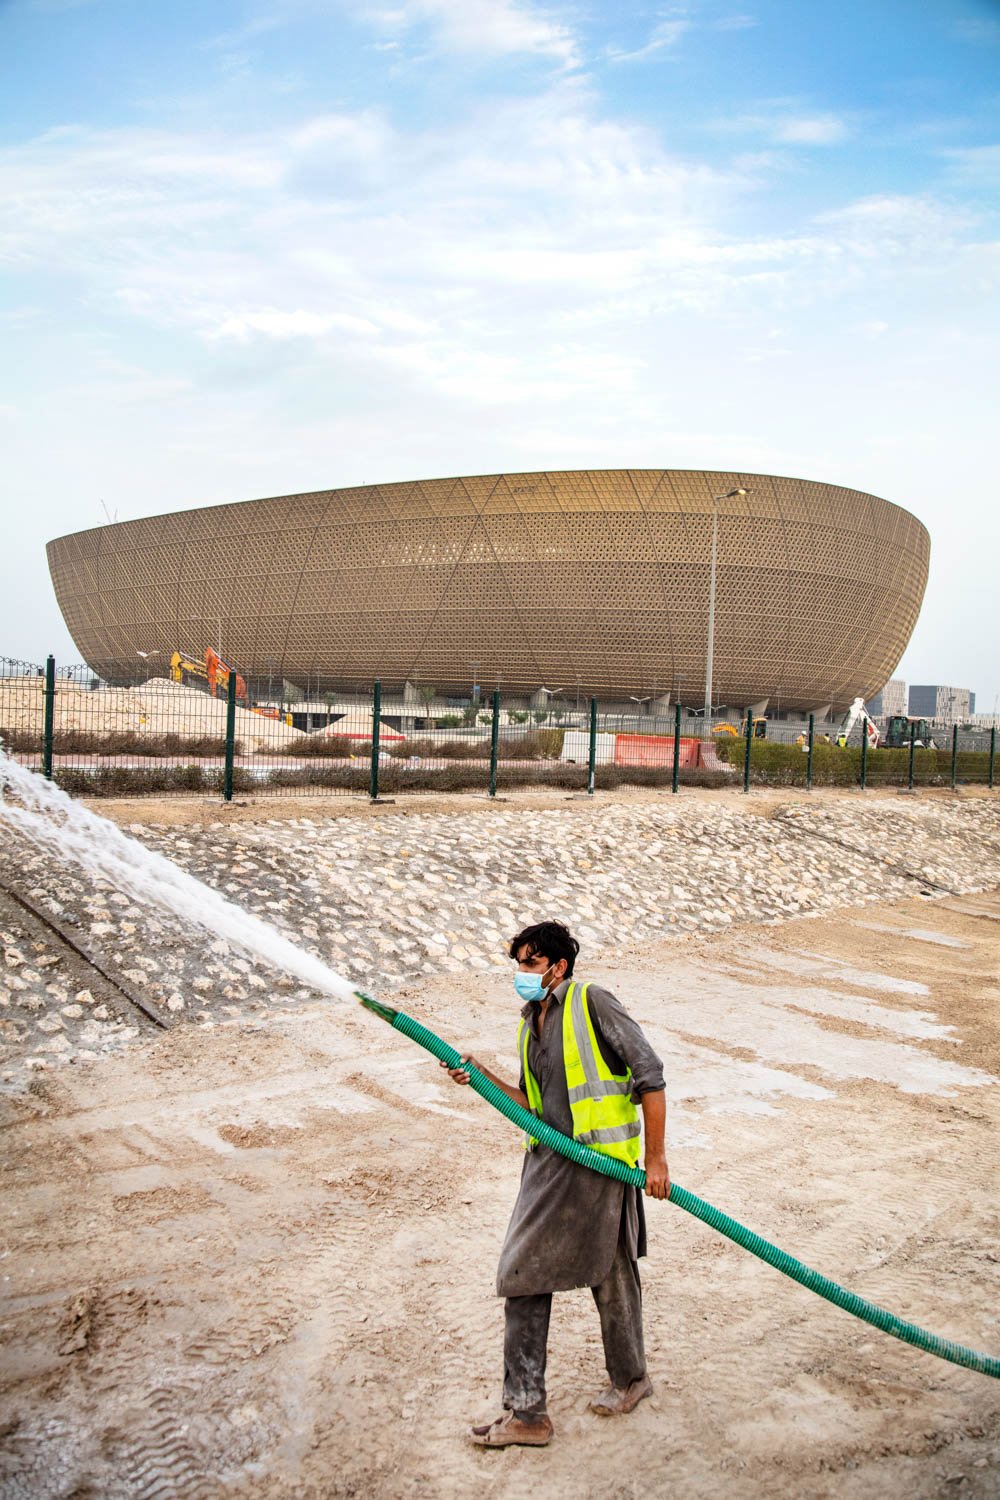  A worker puts finishing touches on the surrounding landscape of the main World Cup stadium in the Lusail area of Doha, Qatar on August 17, 2022. 